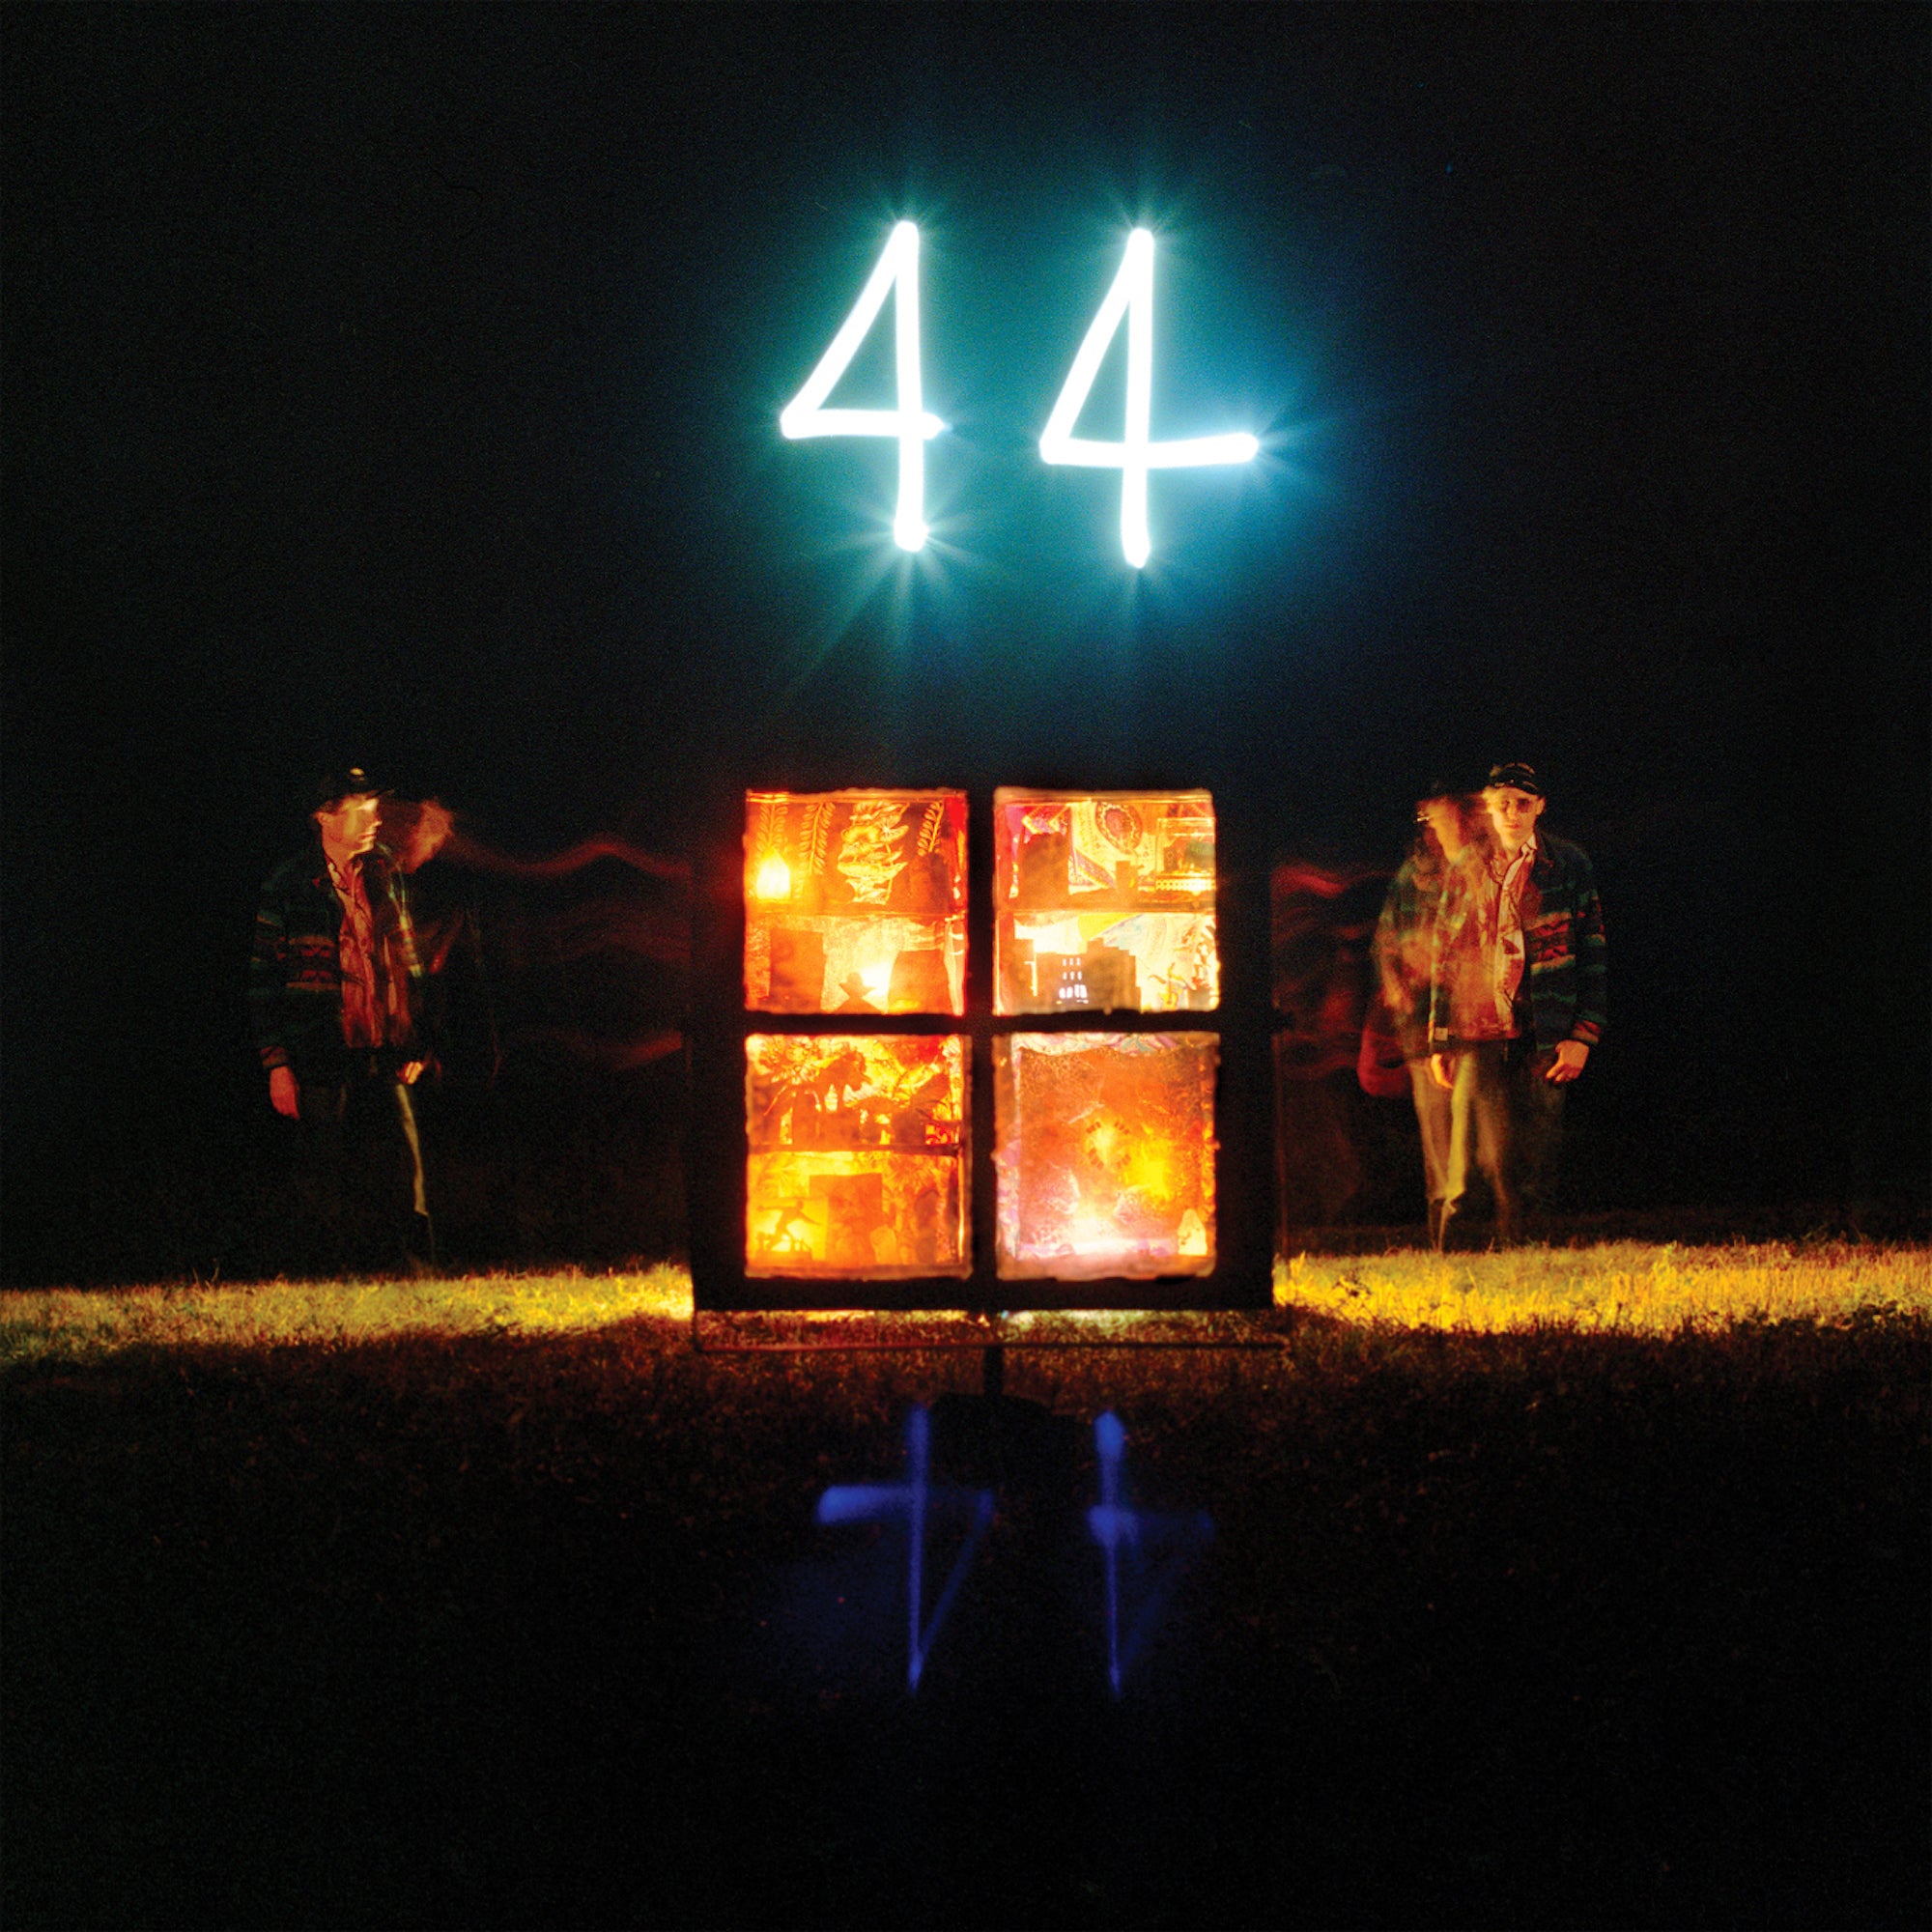 44 by Joel Plaskett artwork from the CD boxset shot at night with lit up "44"